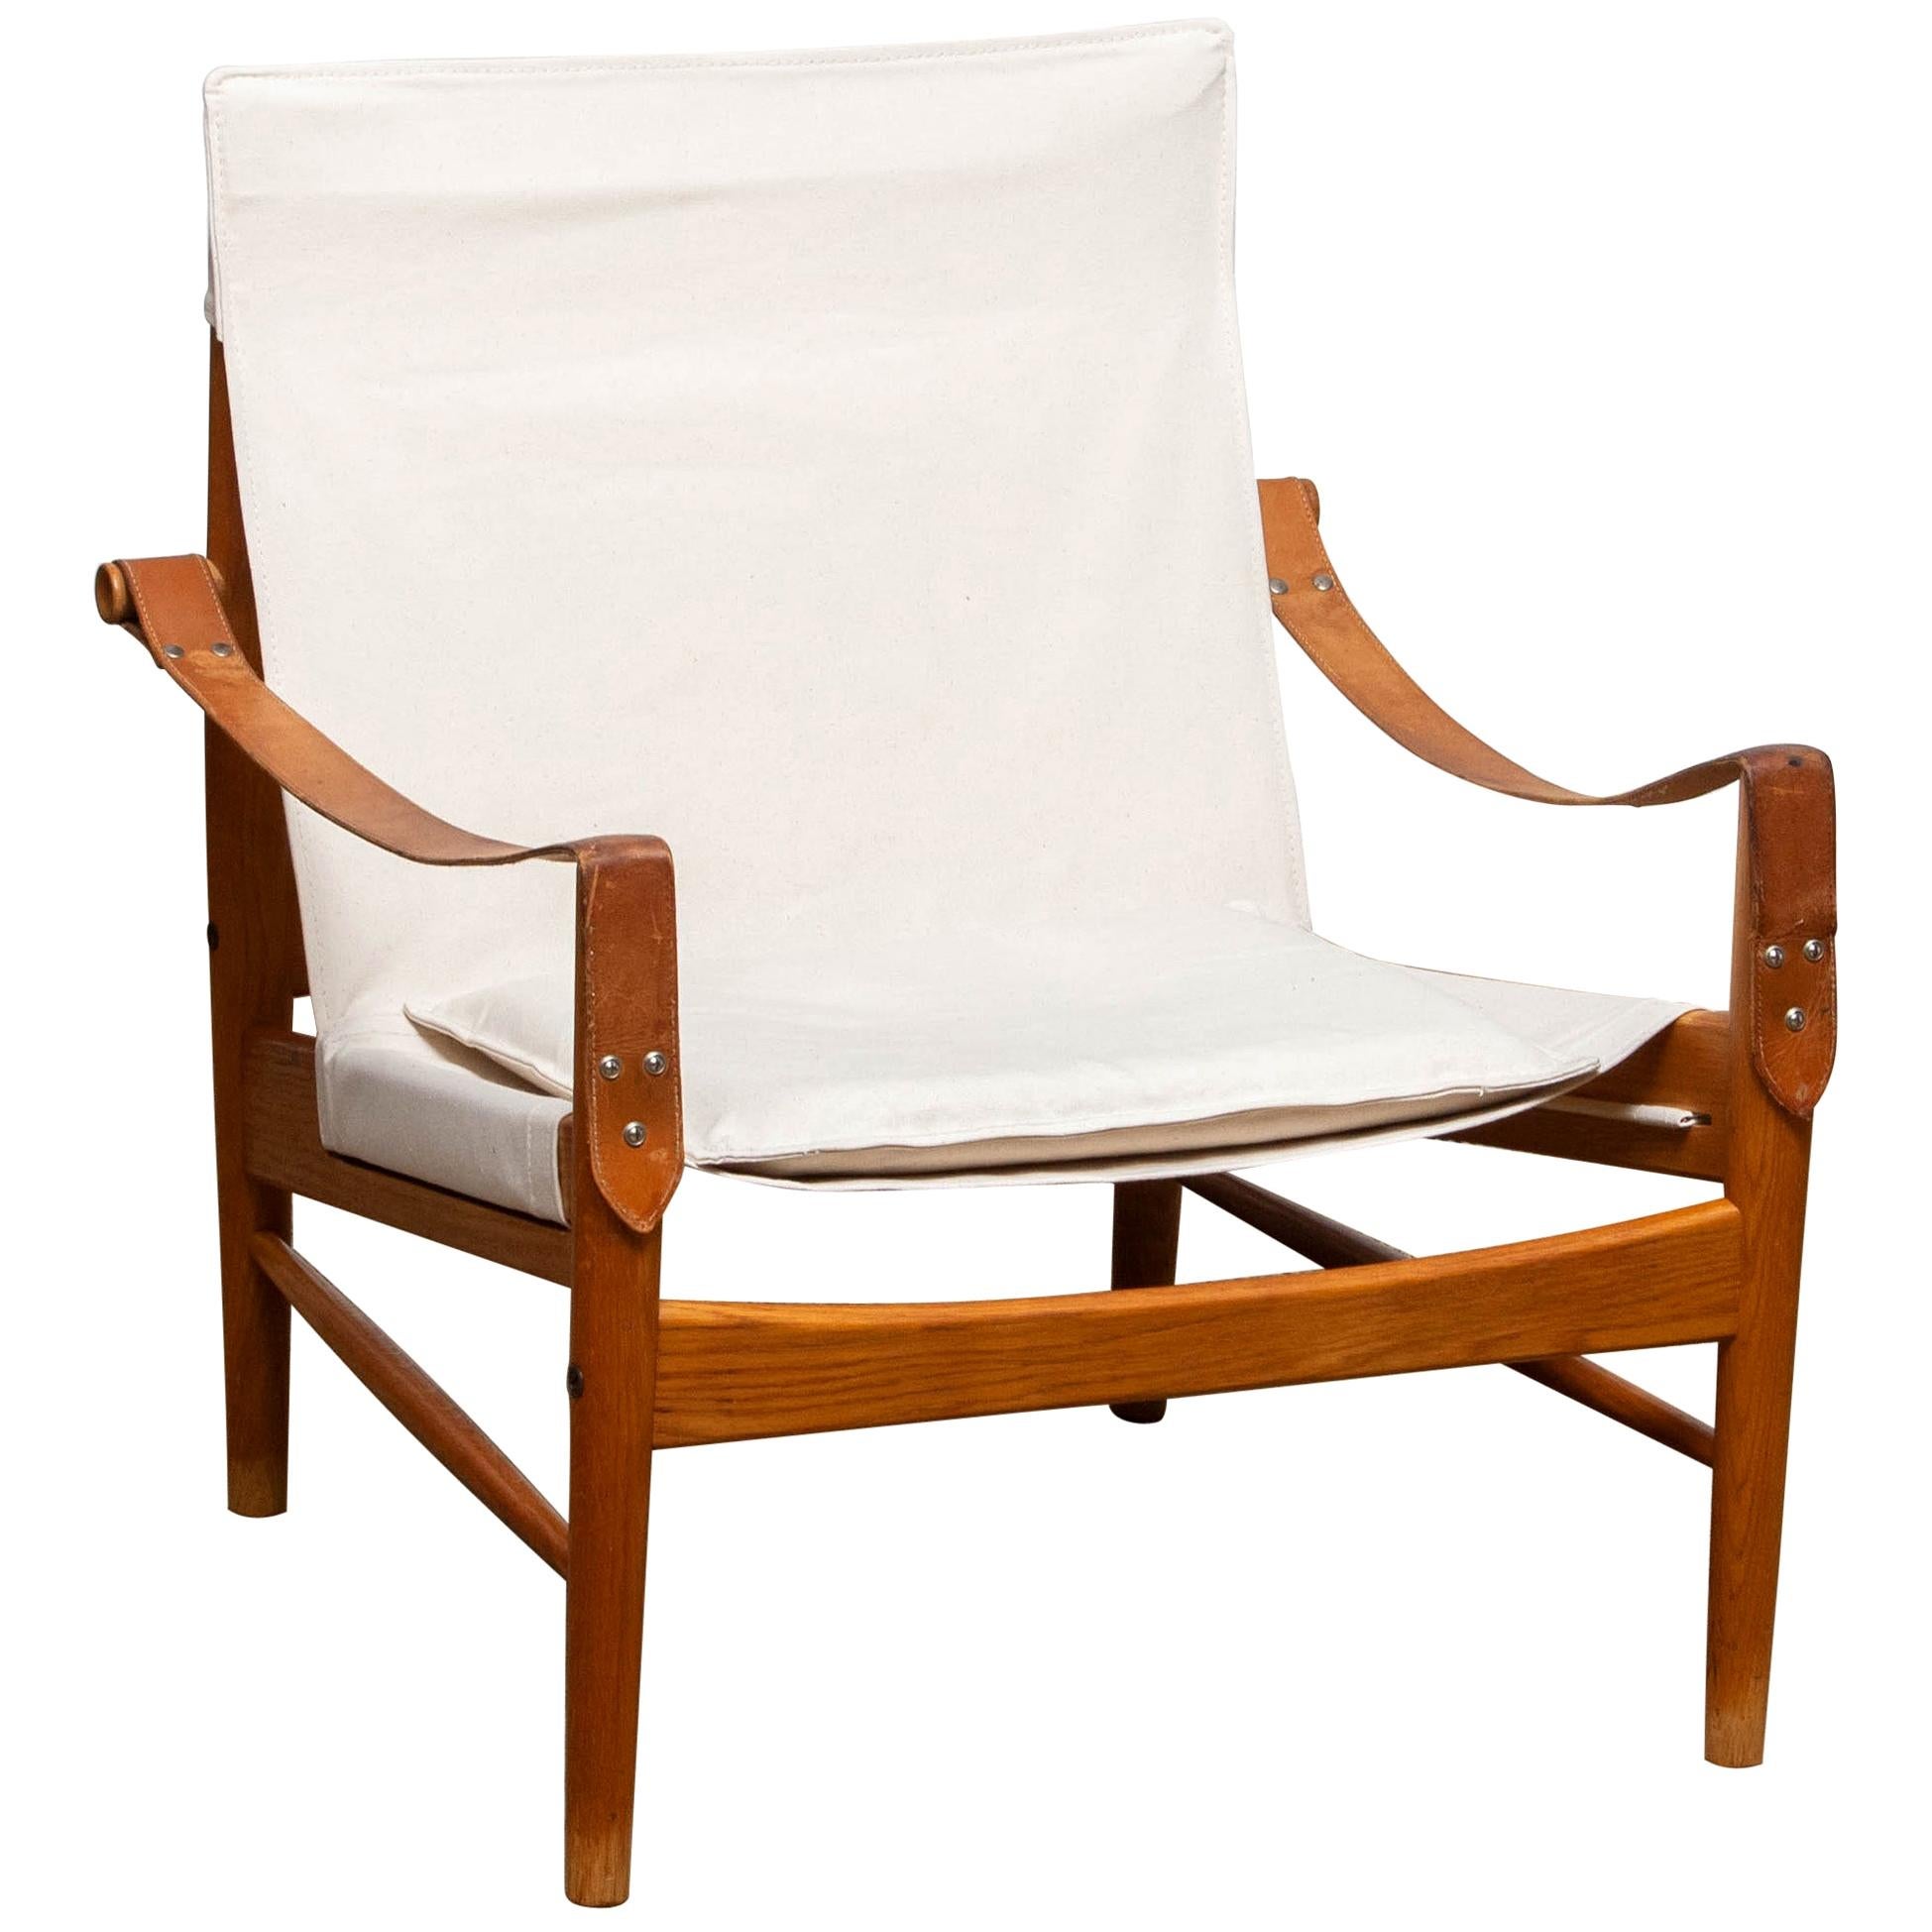 Beautiful safari chair designed by Hans Olsen for Viska Möbler in Kinna, Sweden.
This chairs are made of oak with a new canvas upholstery.
It is in a wonderful condition and marked.
Period: 1960s.
Dimensions: H 81 cm, W 73 cm, D 70 cm, SH 38